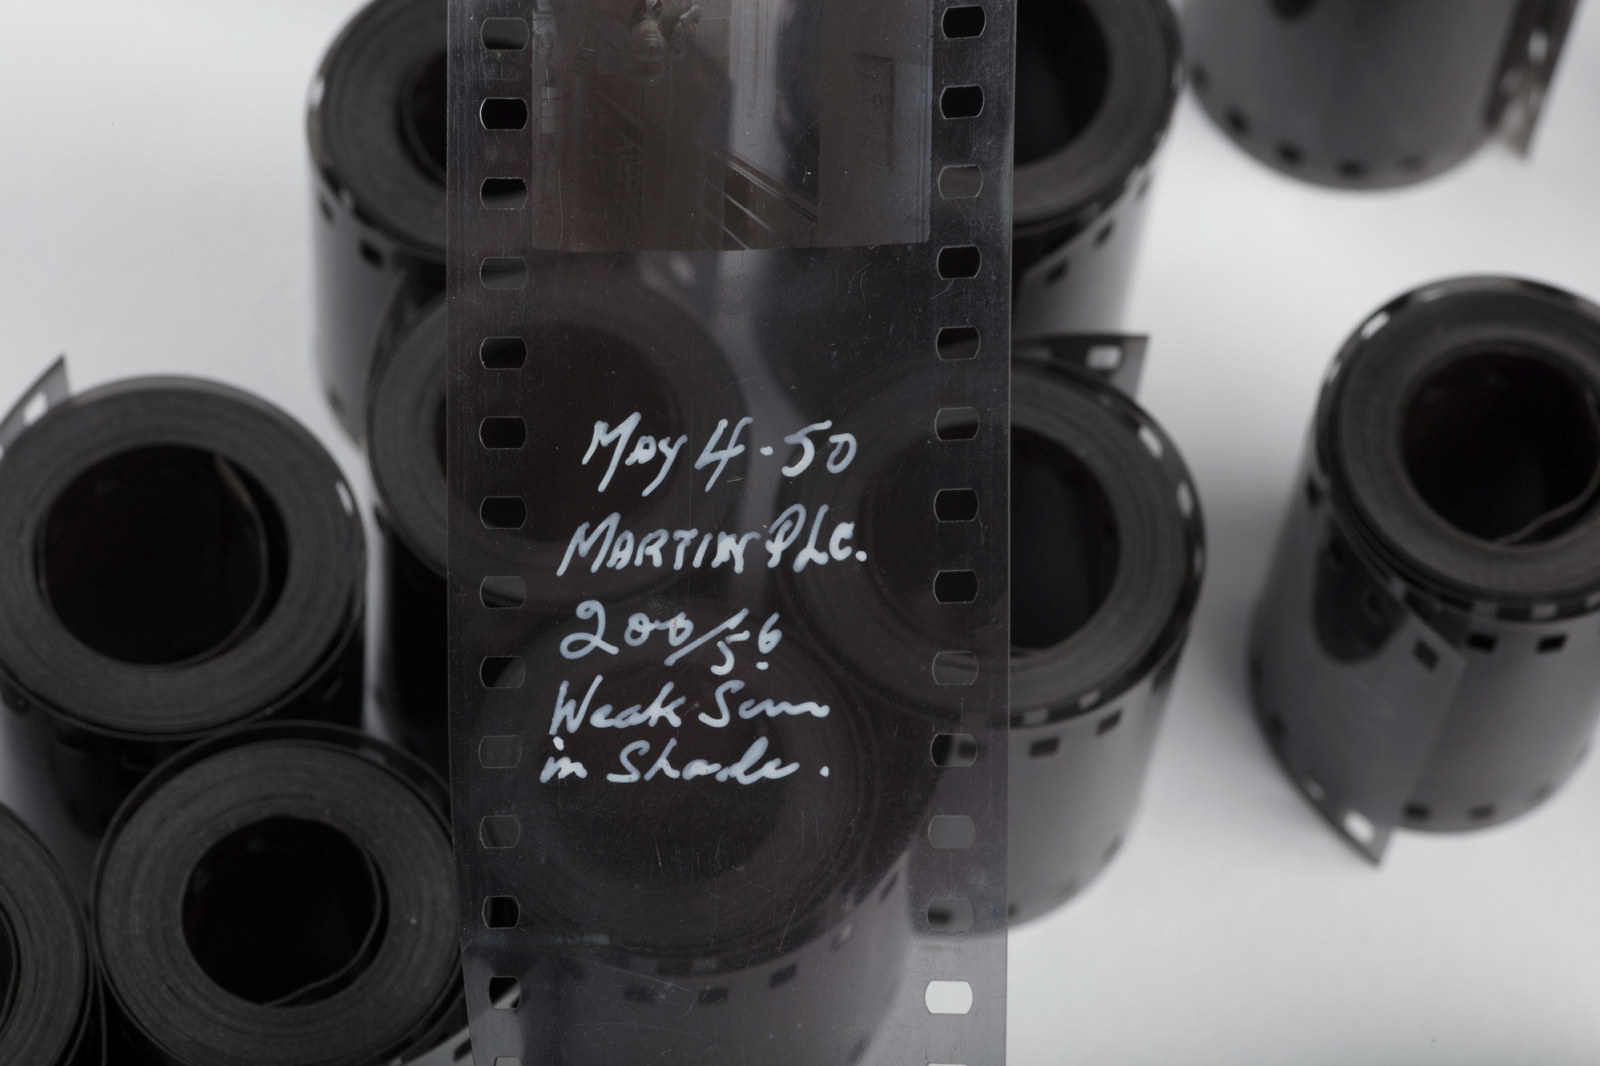 Length of film from Ikon Studio archive